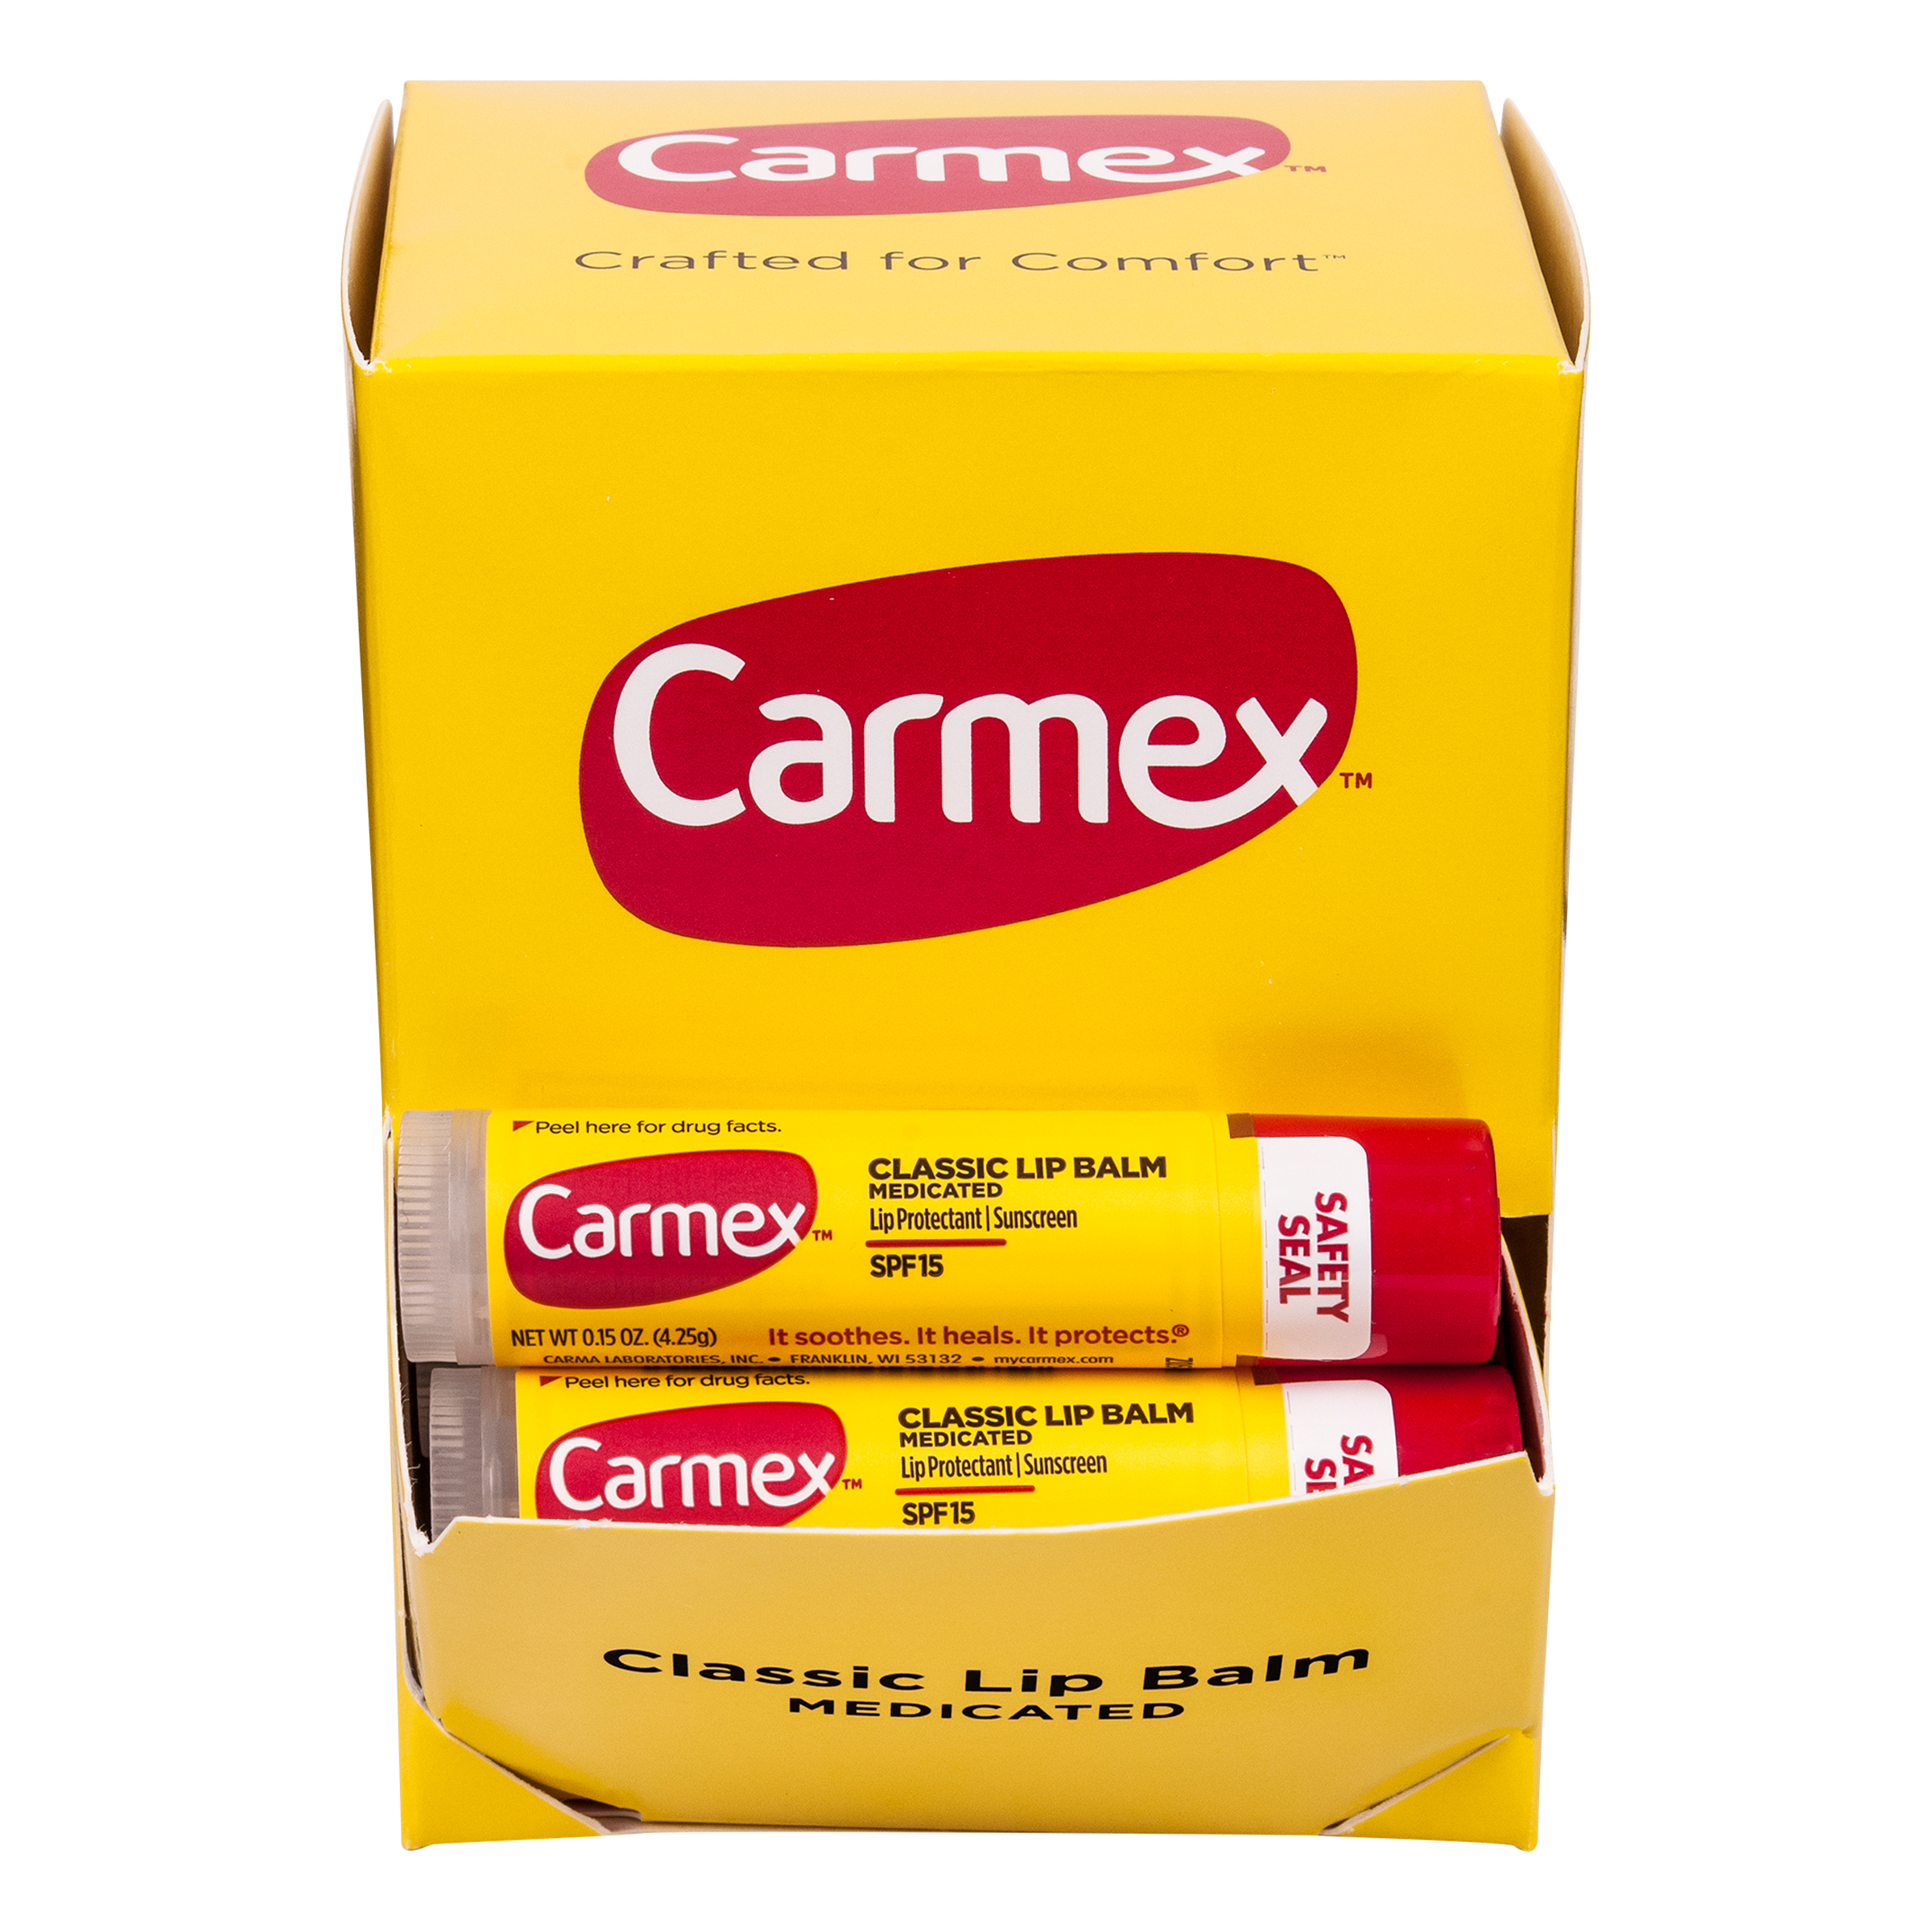 Carmex Moisturizing Medicated Lip Balm with Cocoa Butter, Camphor & Menthol, Multi-Flavor, 24 Pack - image 11 of 11